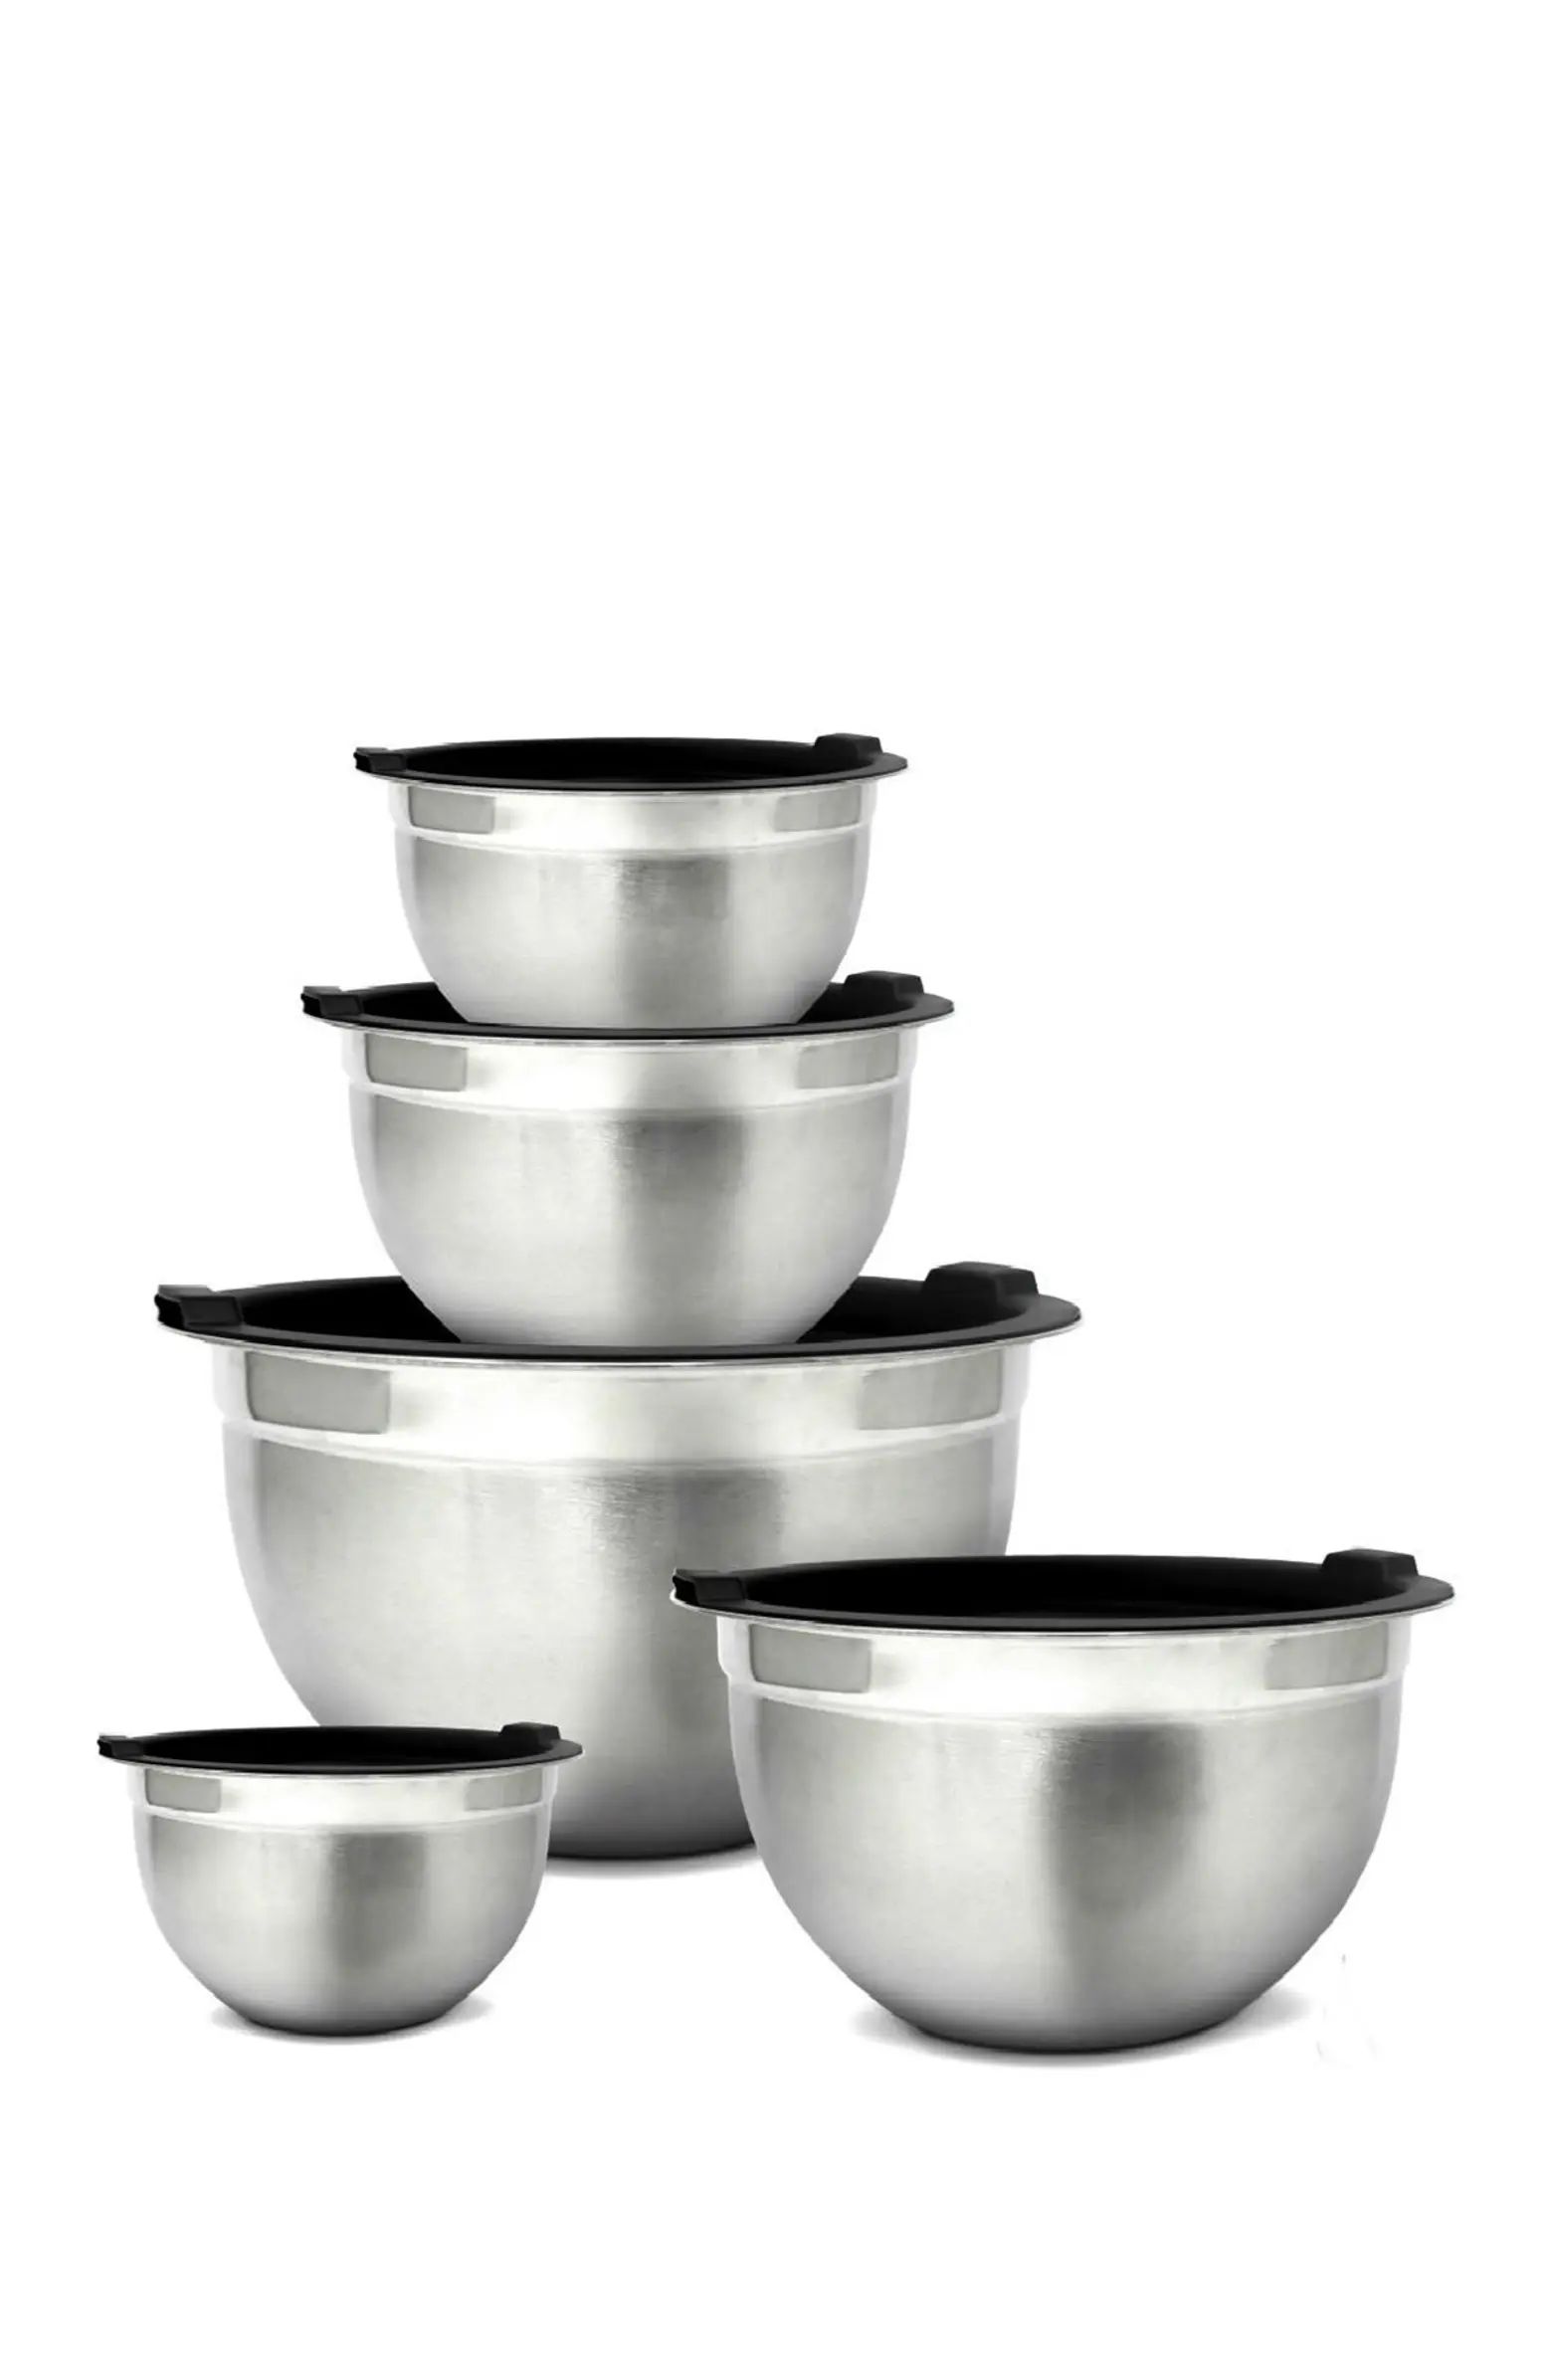 Stainless Steel Mixing Bowls and Airtight Lids - Set of 5 | Nordstrom Rack